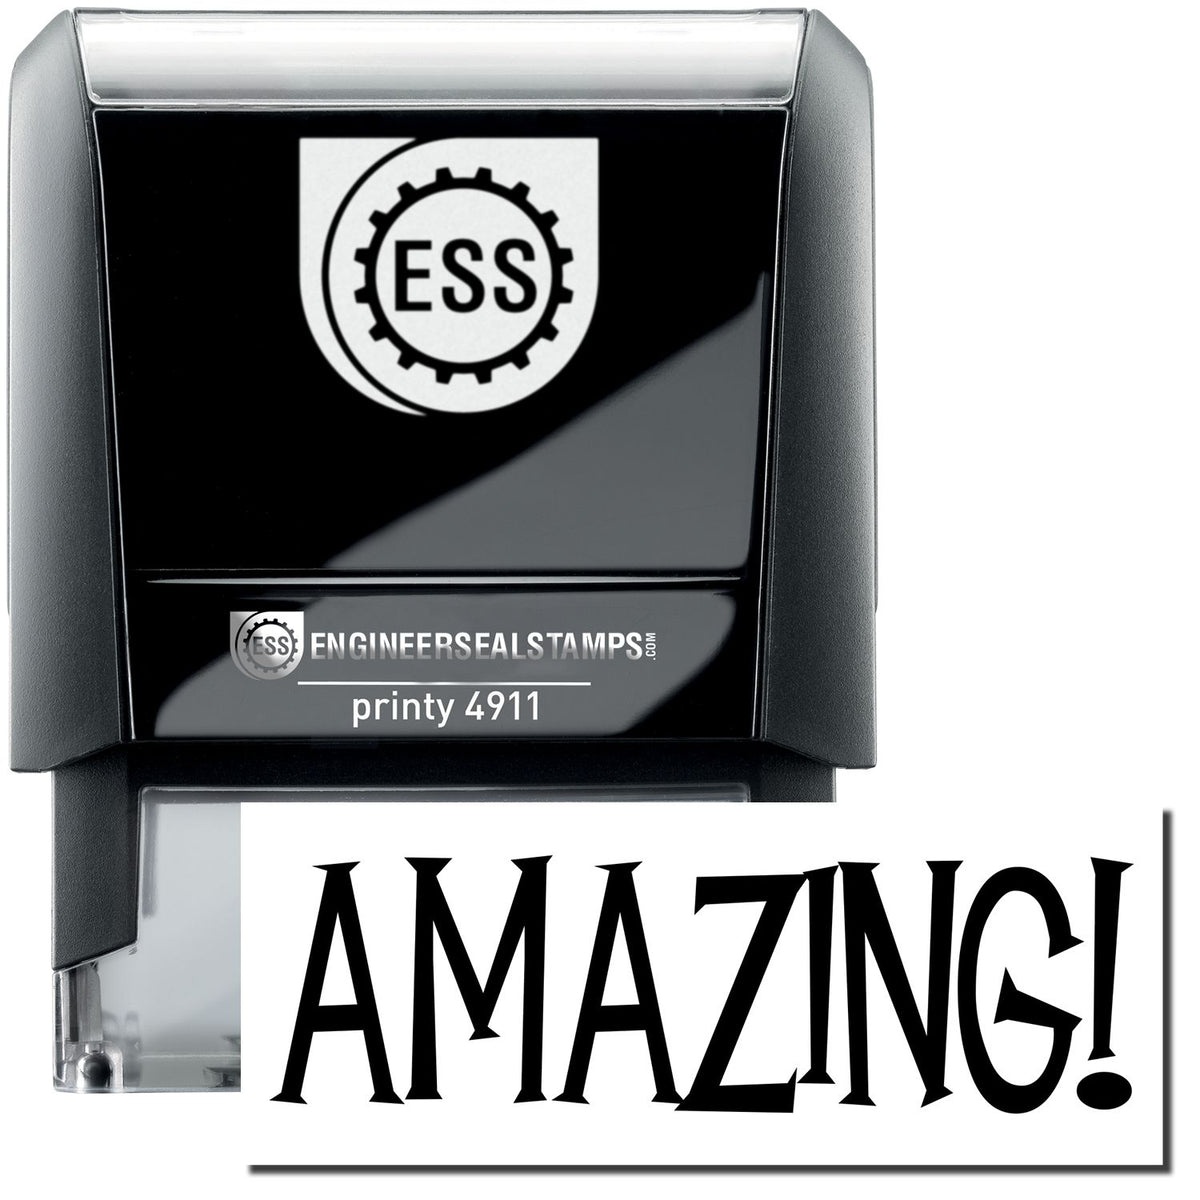 A self-inking stamp with a stamped image showing how the text &quot;AMAZING!&quot; is displayed after stamping.